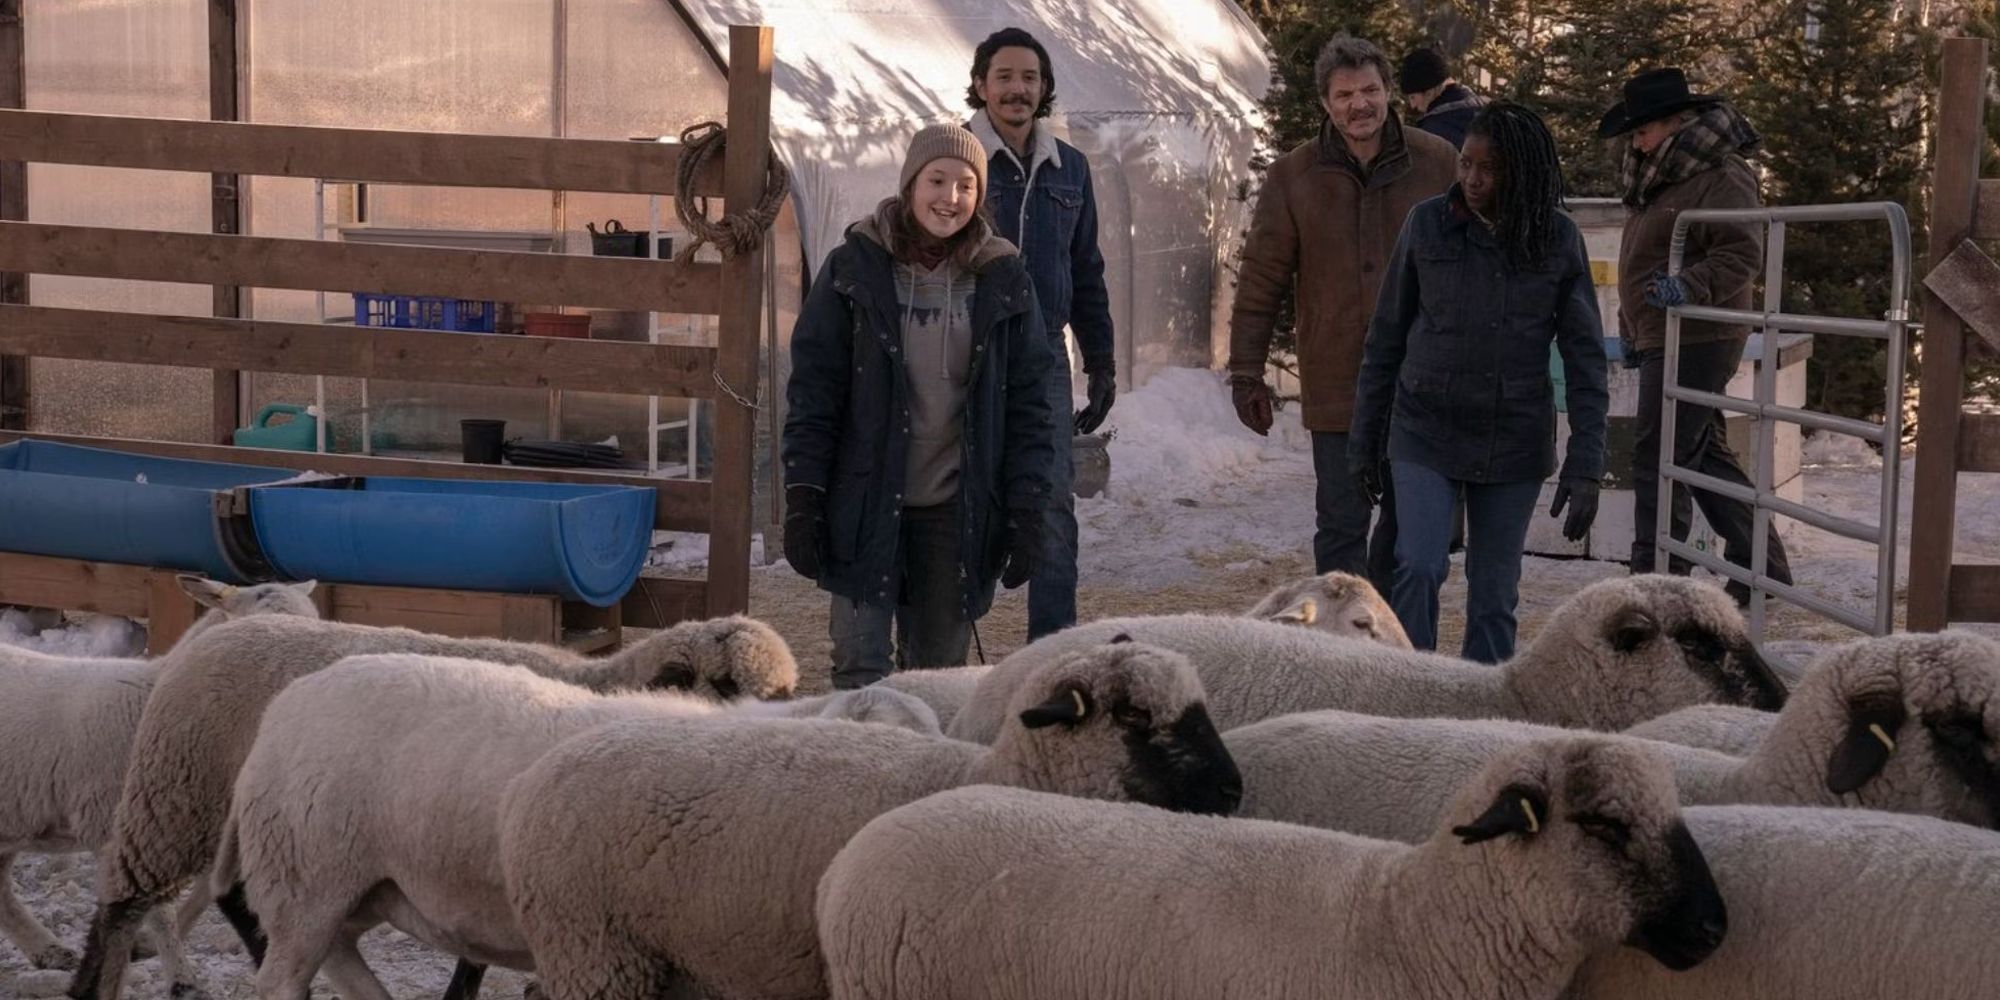 Ellie, Tommy, Joel, and Maria looking at a flock of sheep from The Last of Us episode 6